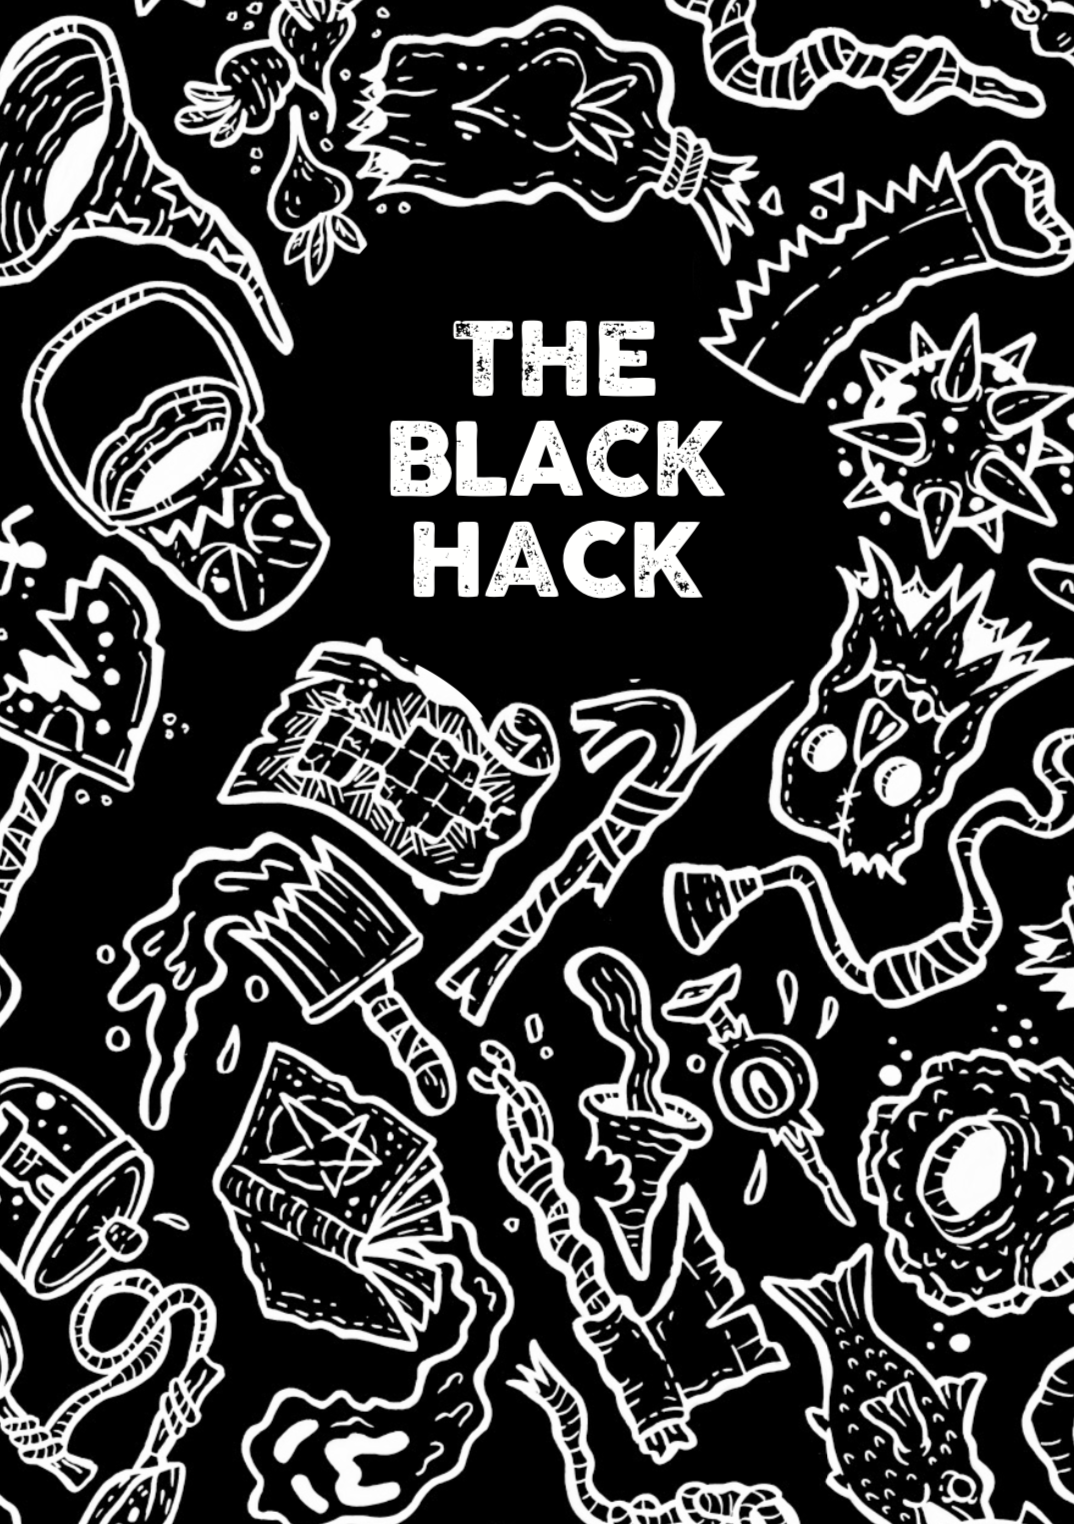 images/posts/blackhackcover.png